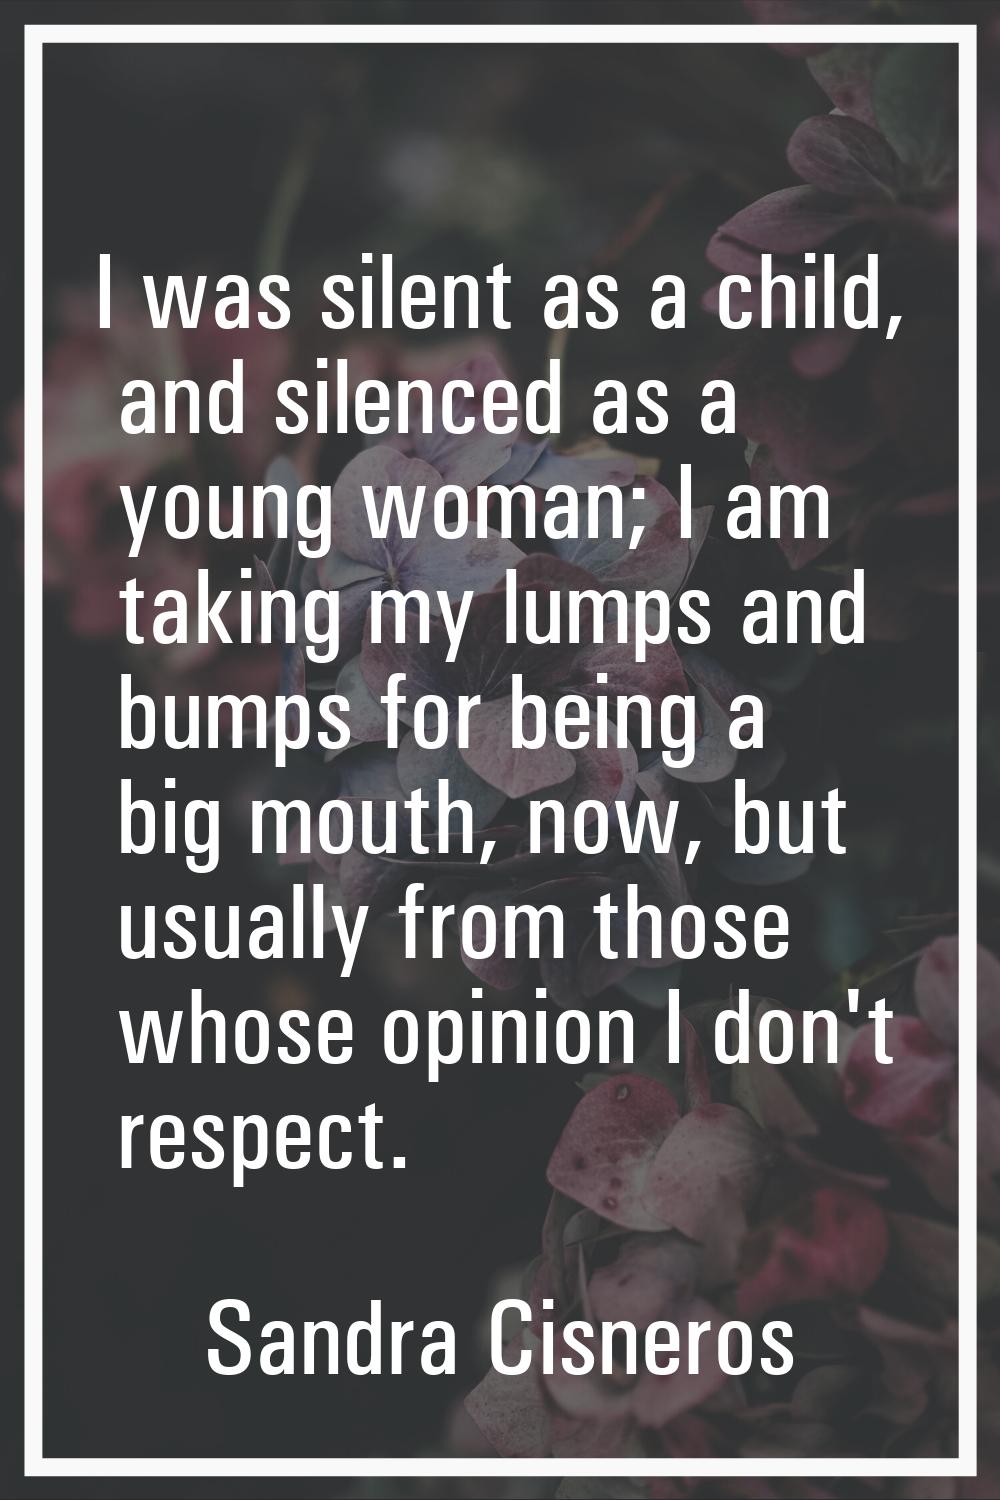 I was silent as a child, and silenced as a young woman; I am taking my lumps and bumps for being a 